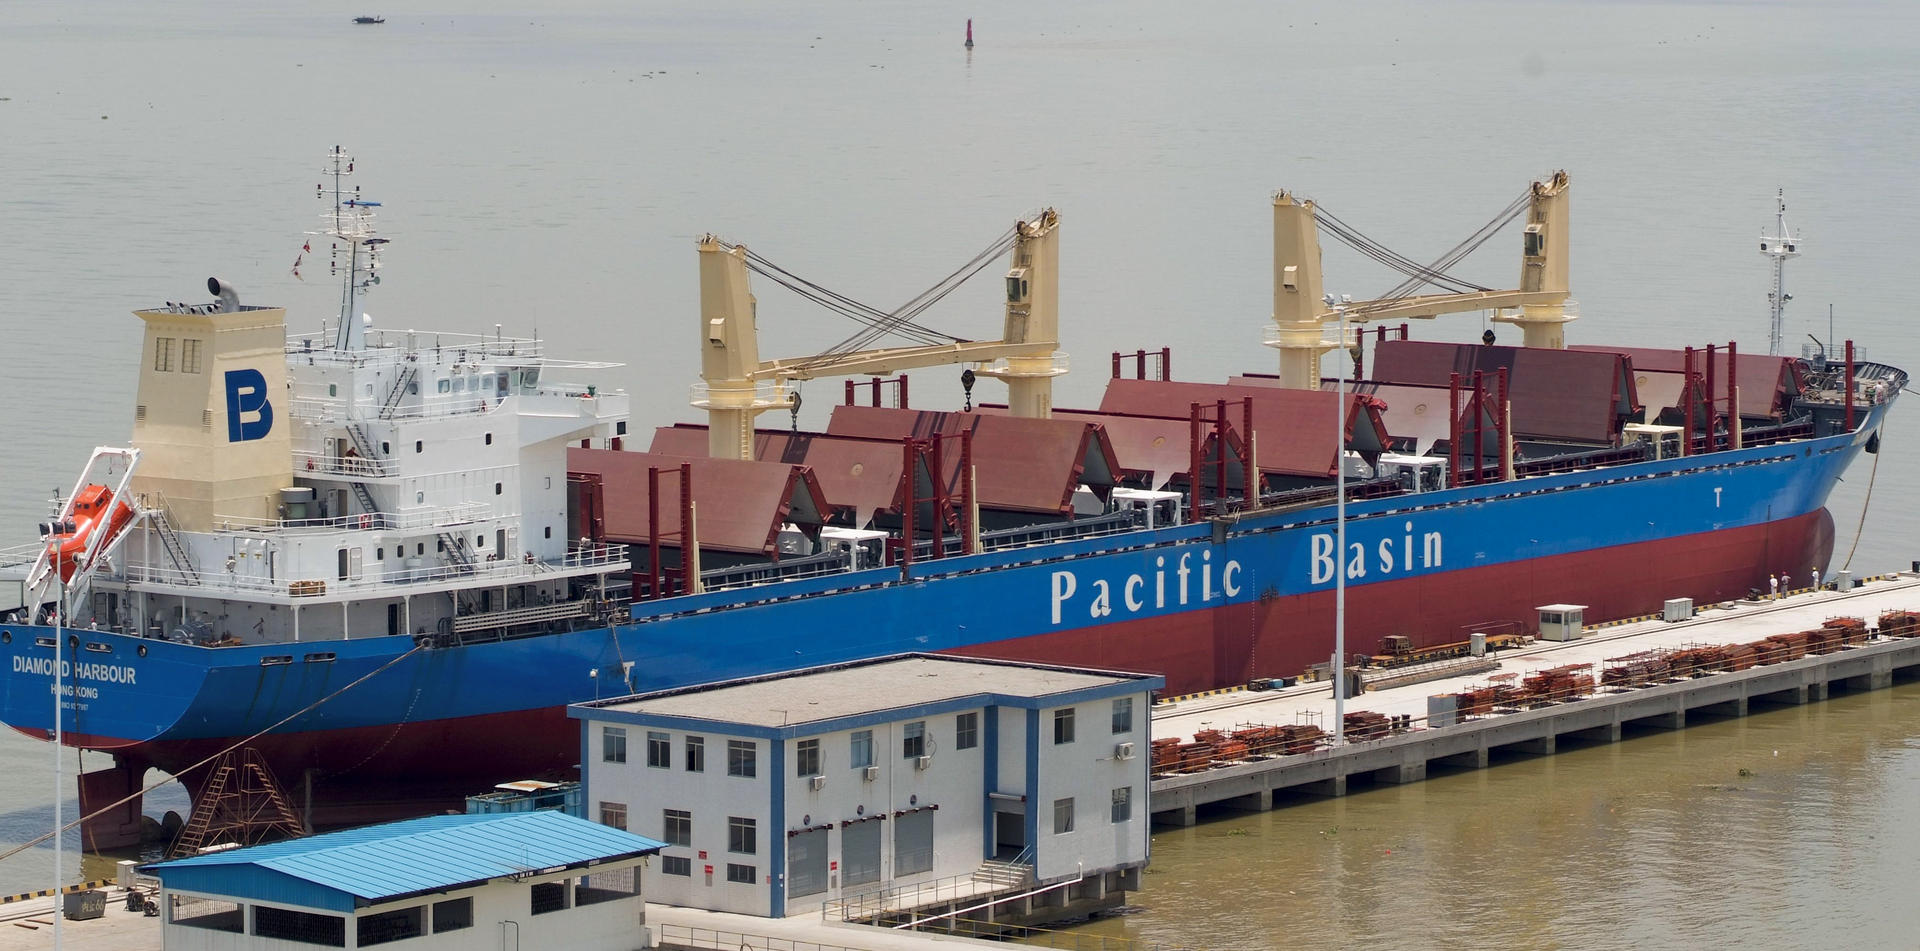 Pacific Basin Shipping says rising affluence on the mainland means more demand for food and building supplies, which account for two-thirds of its cargoes. Photo: Bloomberg